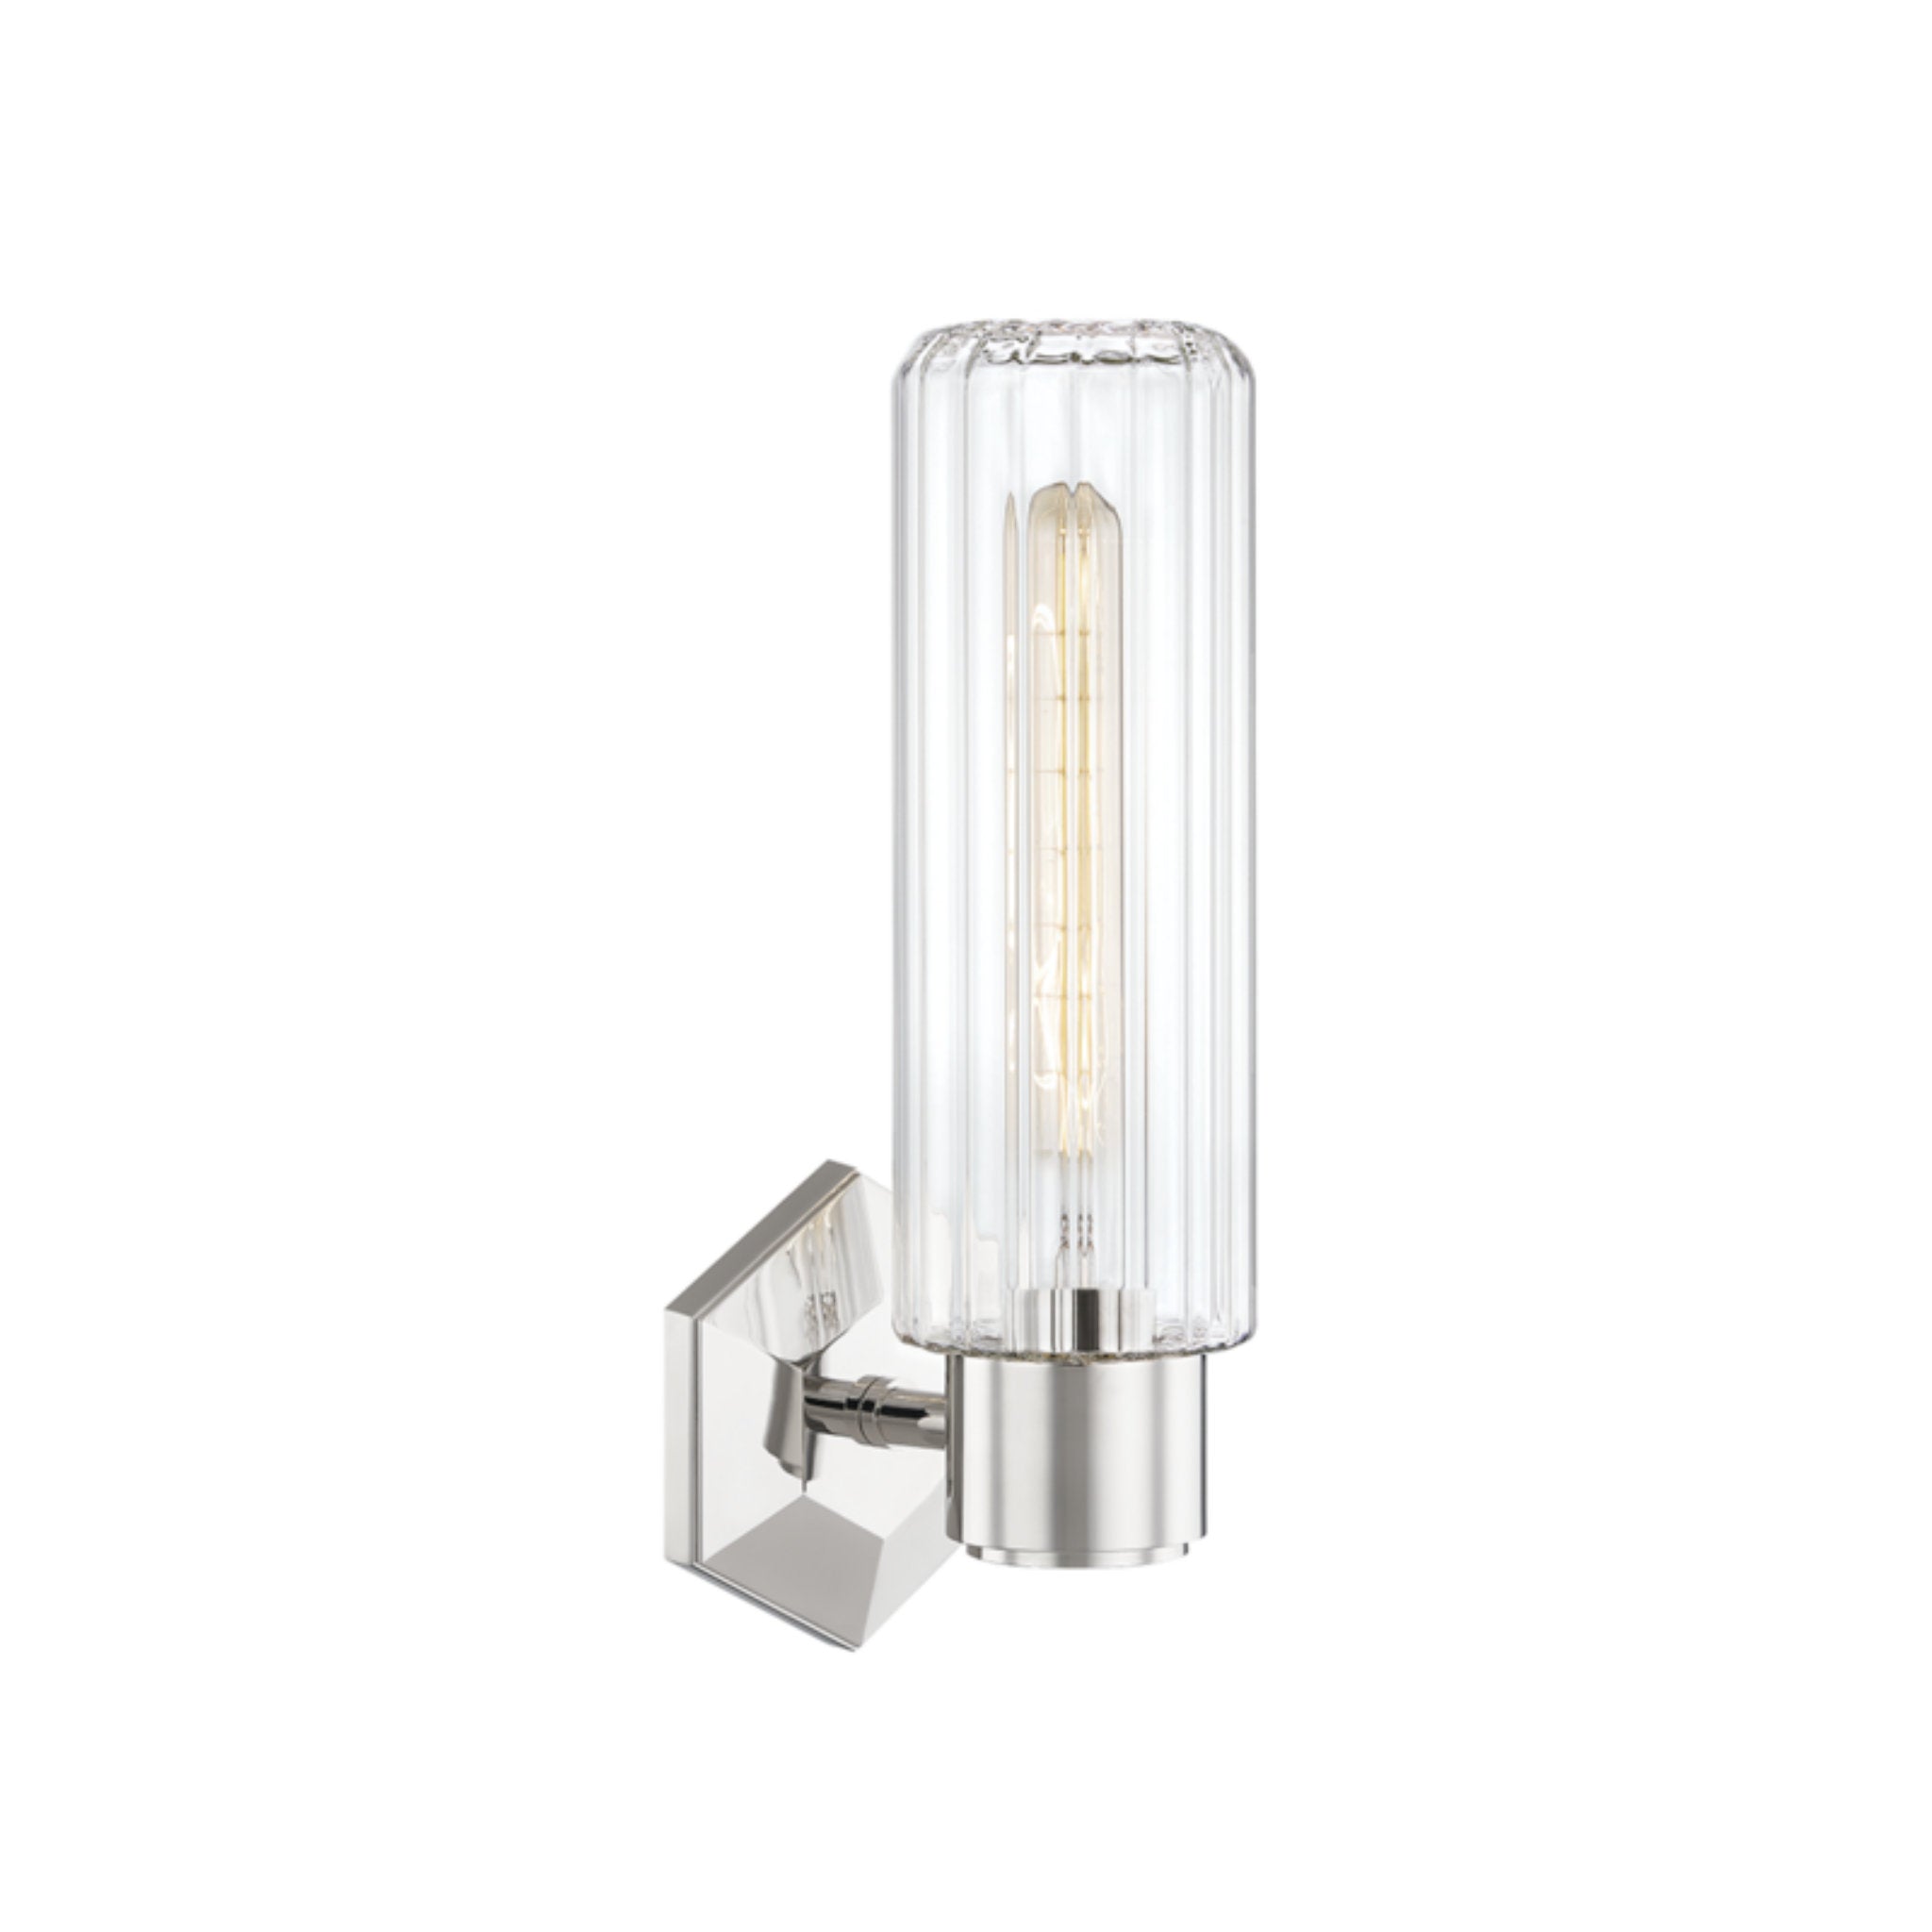 Roebling 1 Light Wall Sconce in Polished Nickel